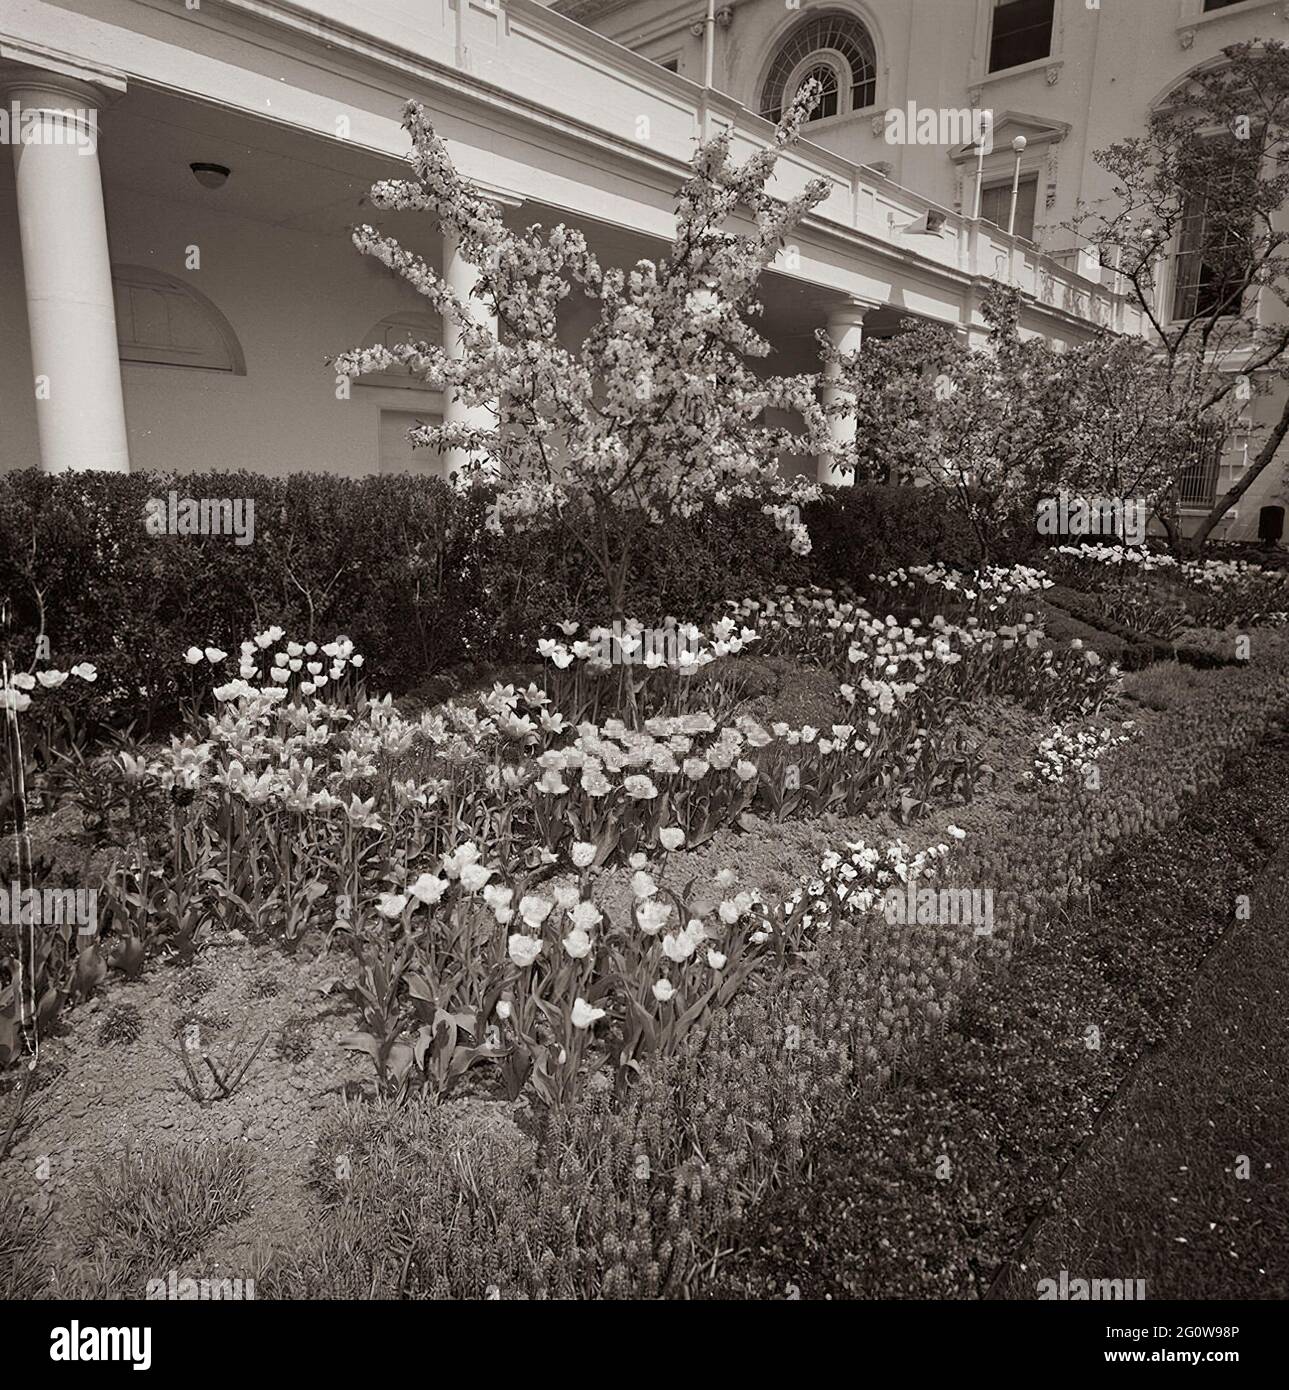 ST-C102-1-63                 18 April 1963  Rose Garden, views. [Discolored streak on left side of image is original to the negative.]  Please credit 'Cecil Stoughton. White House Photographs. John F. Kennedy Presidential Library and Museum, Boston' Stock Photo